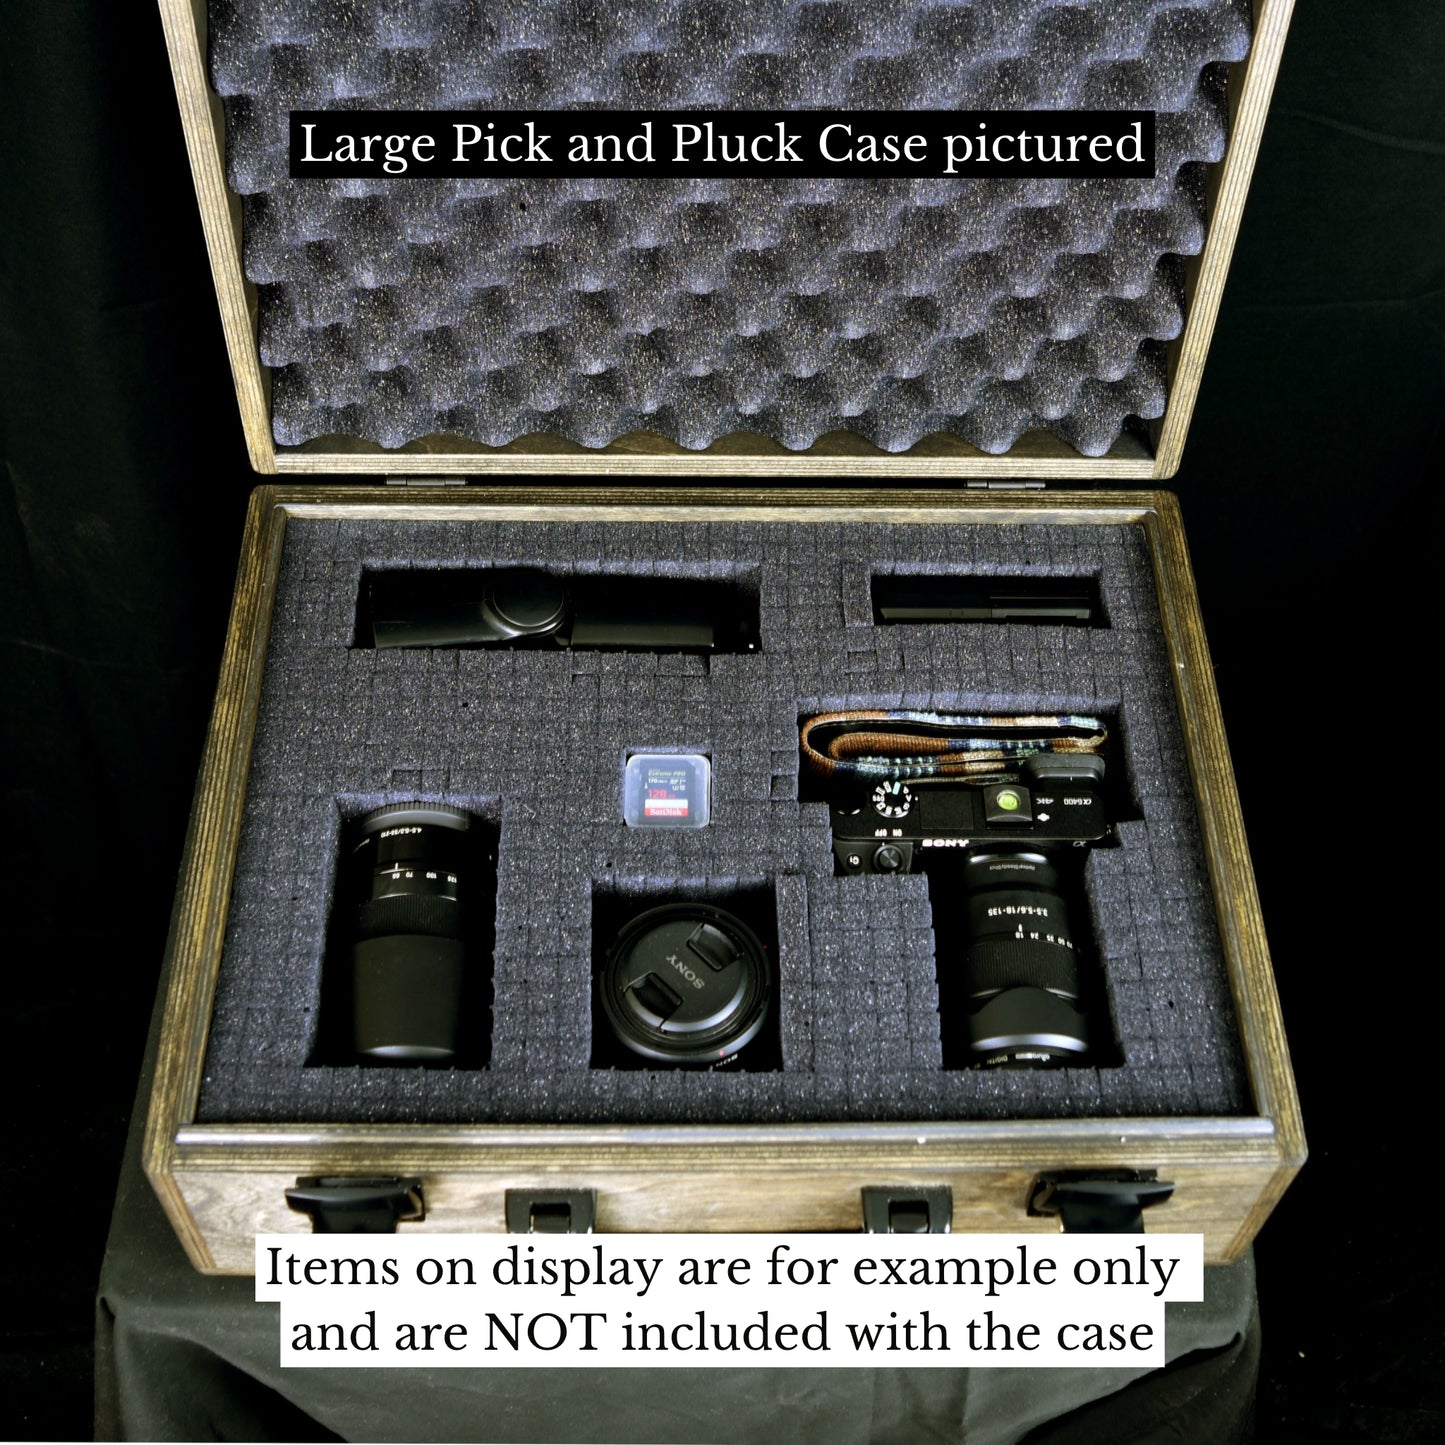 Small Pick and Pluck Case